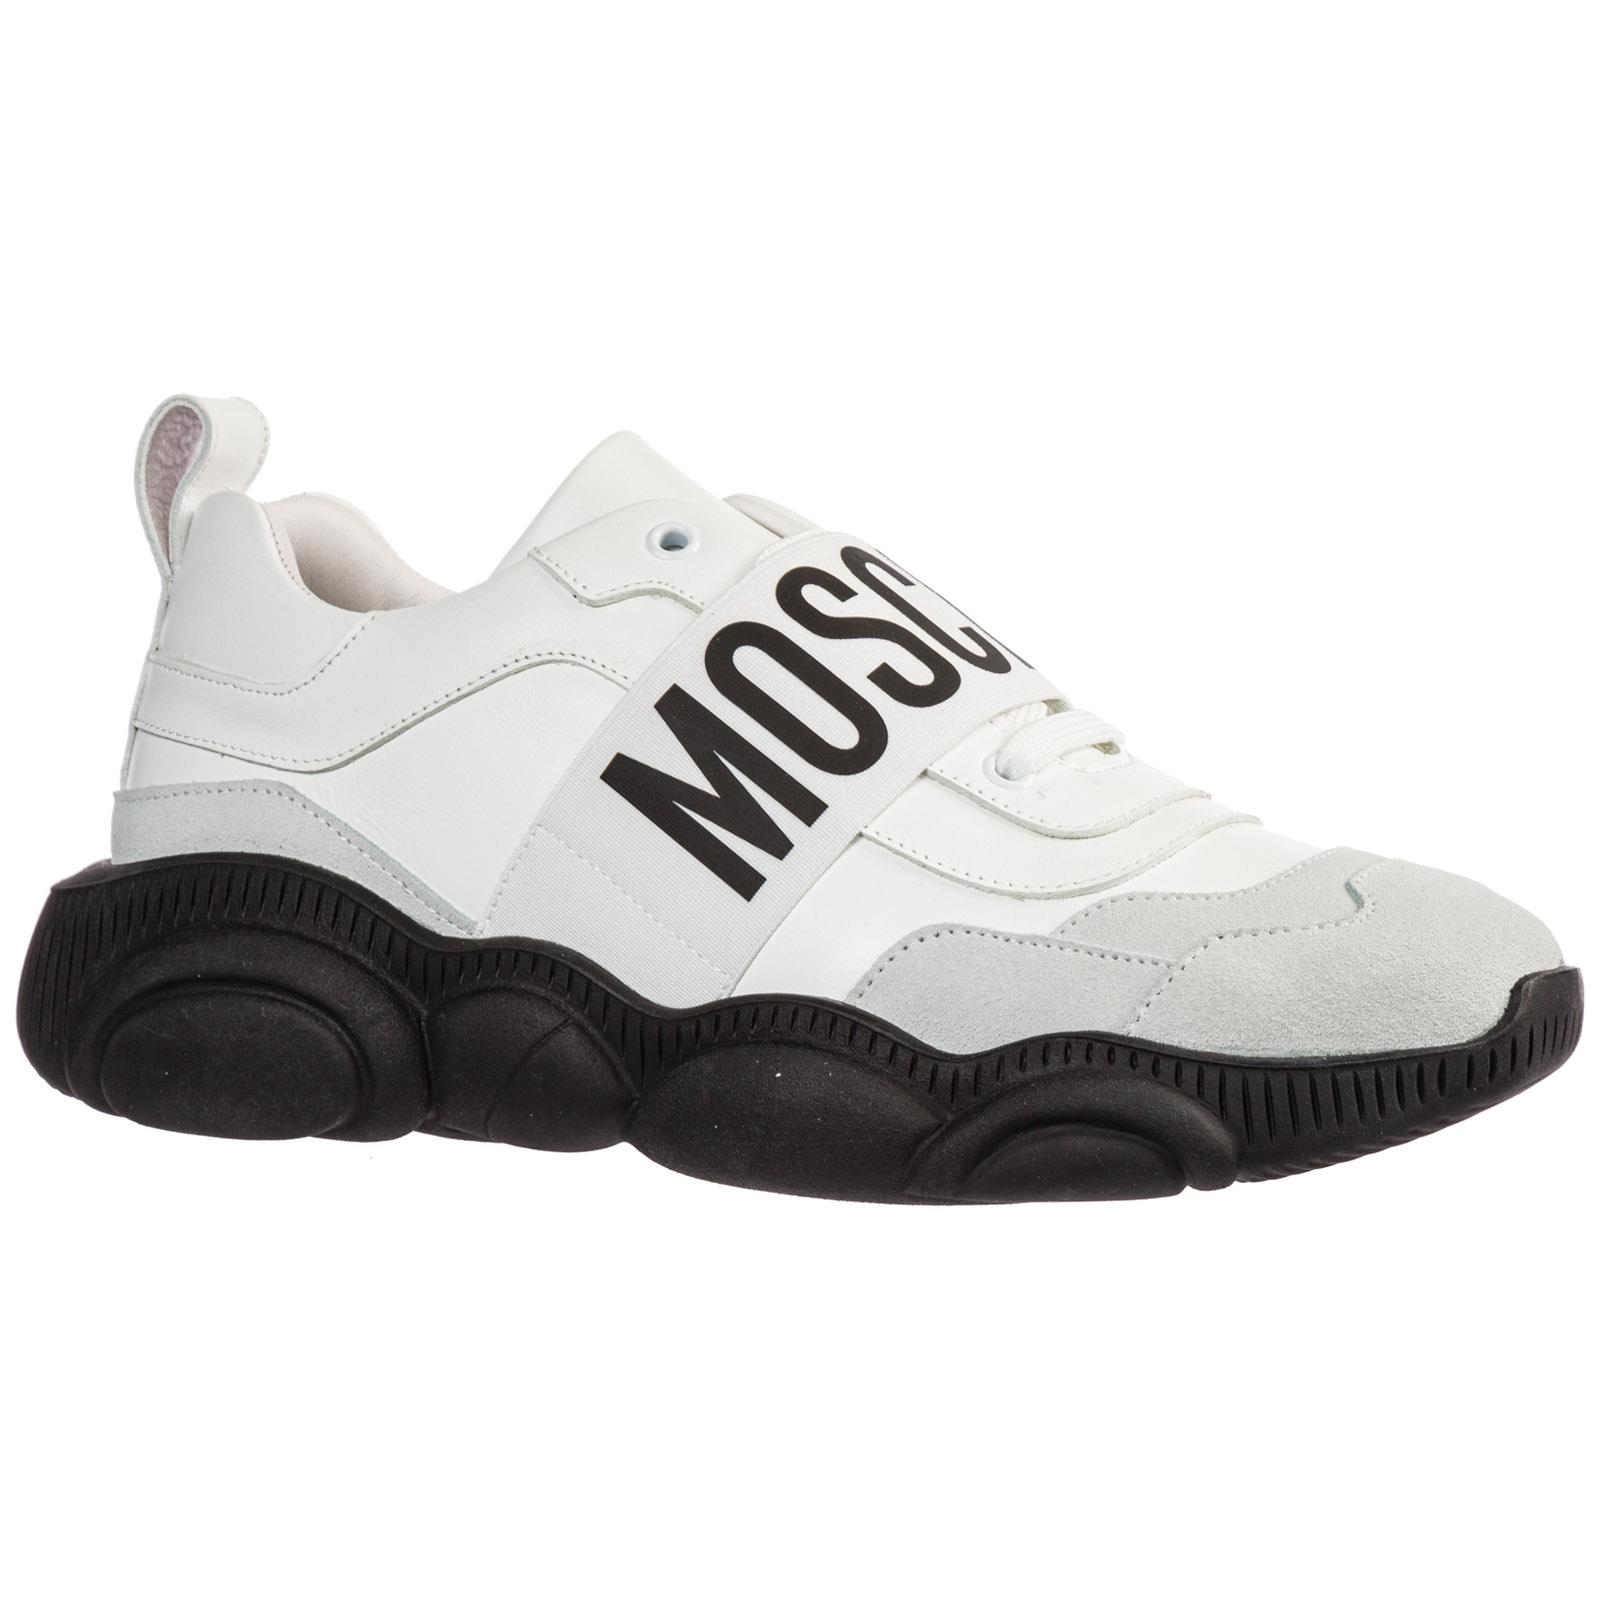 Moschino Men's Shoes Leather Trainers Sneakers Teddy Run in White for ...